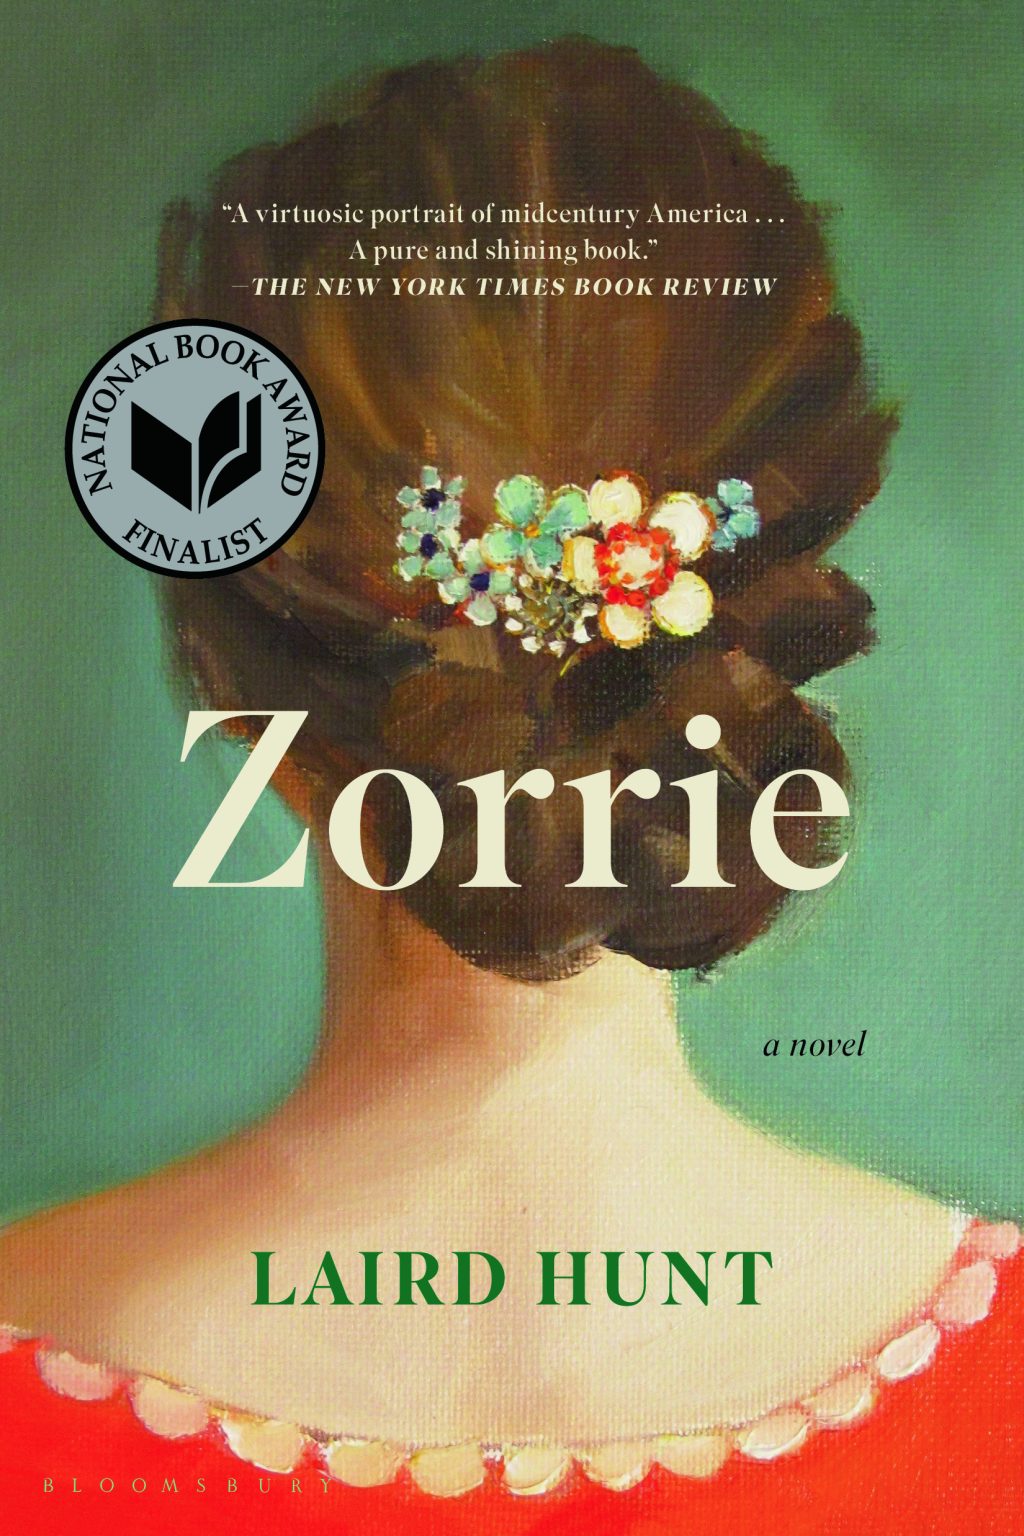 One of our recommended books is Zorrie by Laird Hunt